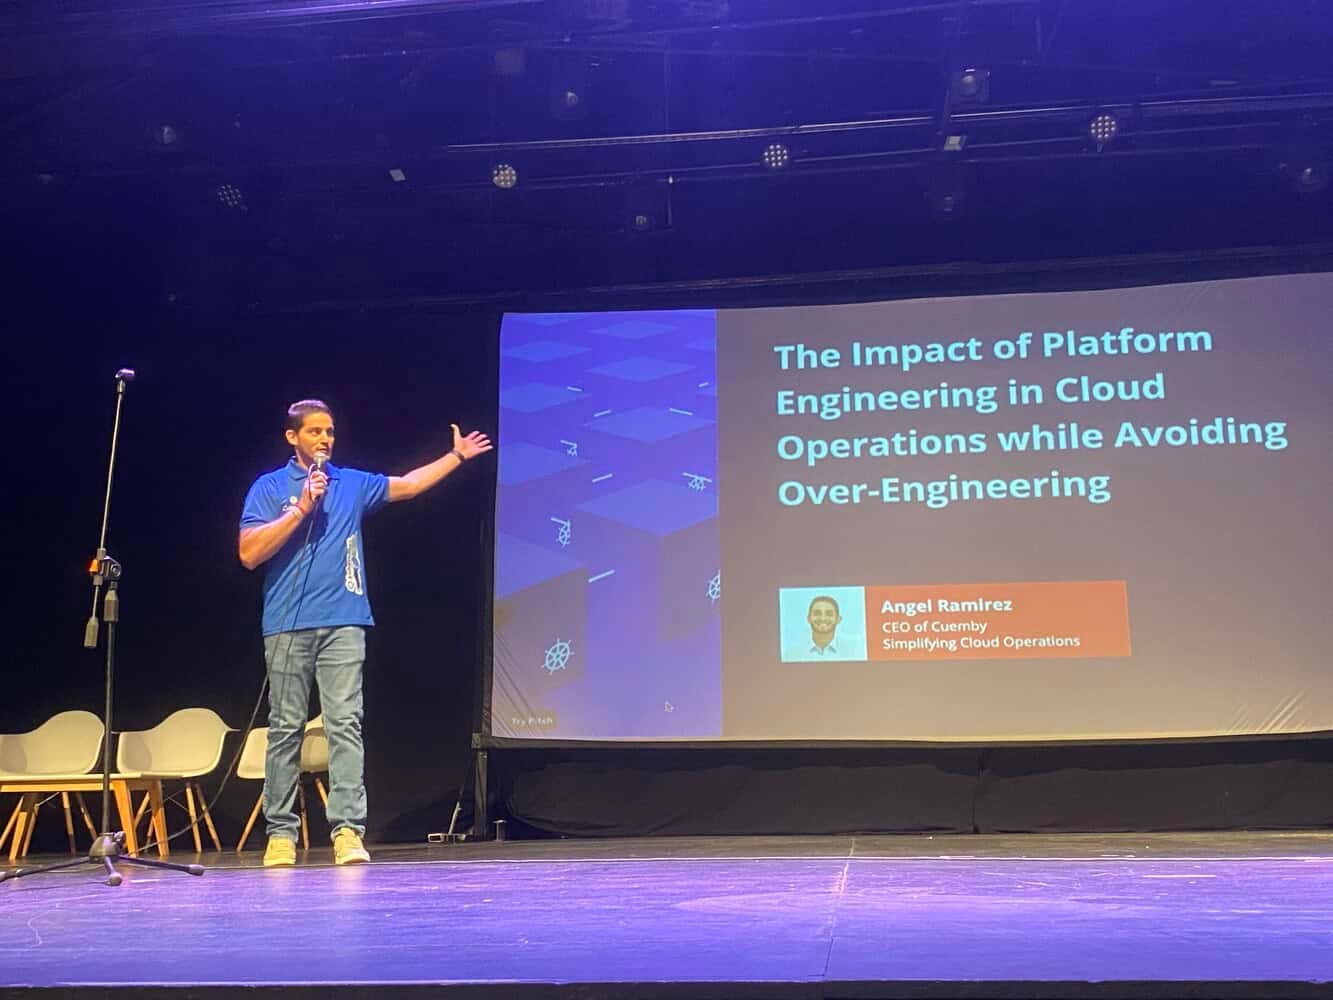 Angel Ramirez speaking on the stage for The Impact of Platform Engineering in Cloud Operations while avoiding over-engineering